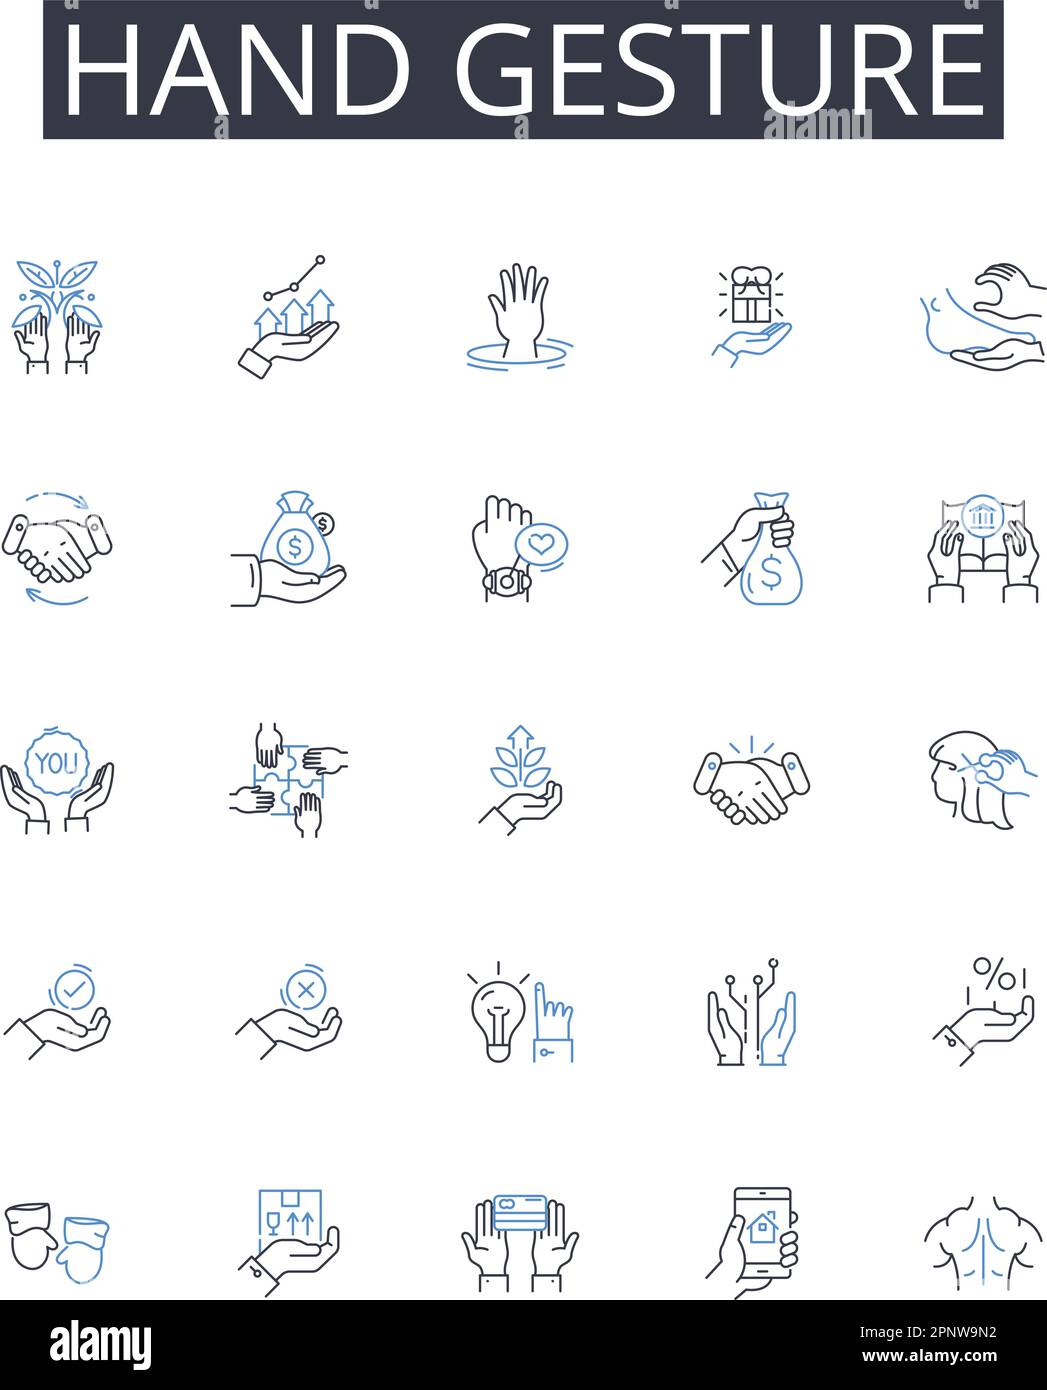 Hand gesture line icons collection. Eye contact, Facial expression, Body language, Verbal communication, T of voice, Nonverbal cues, Social Stock Vector